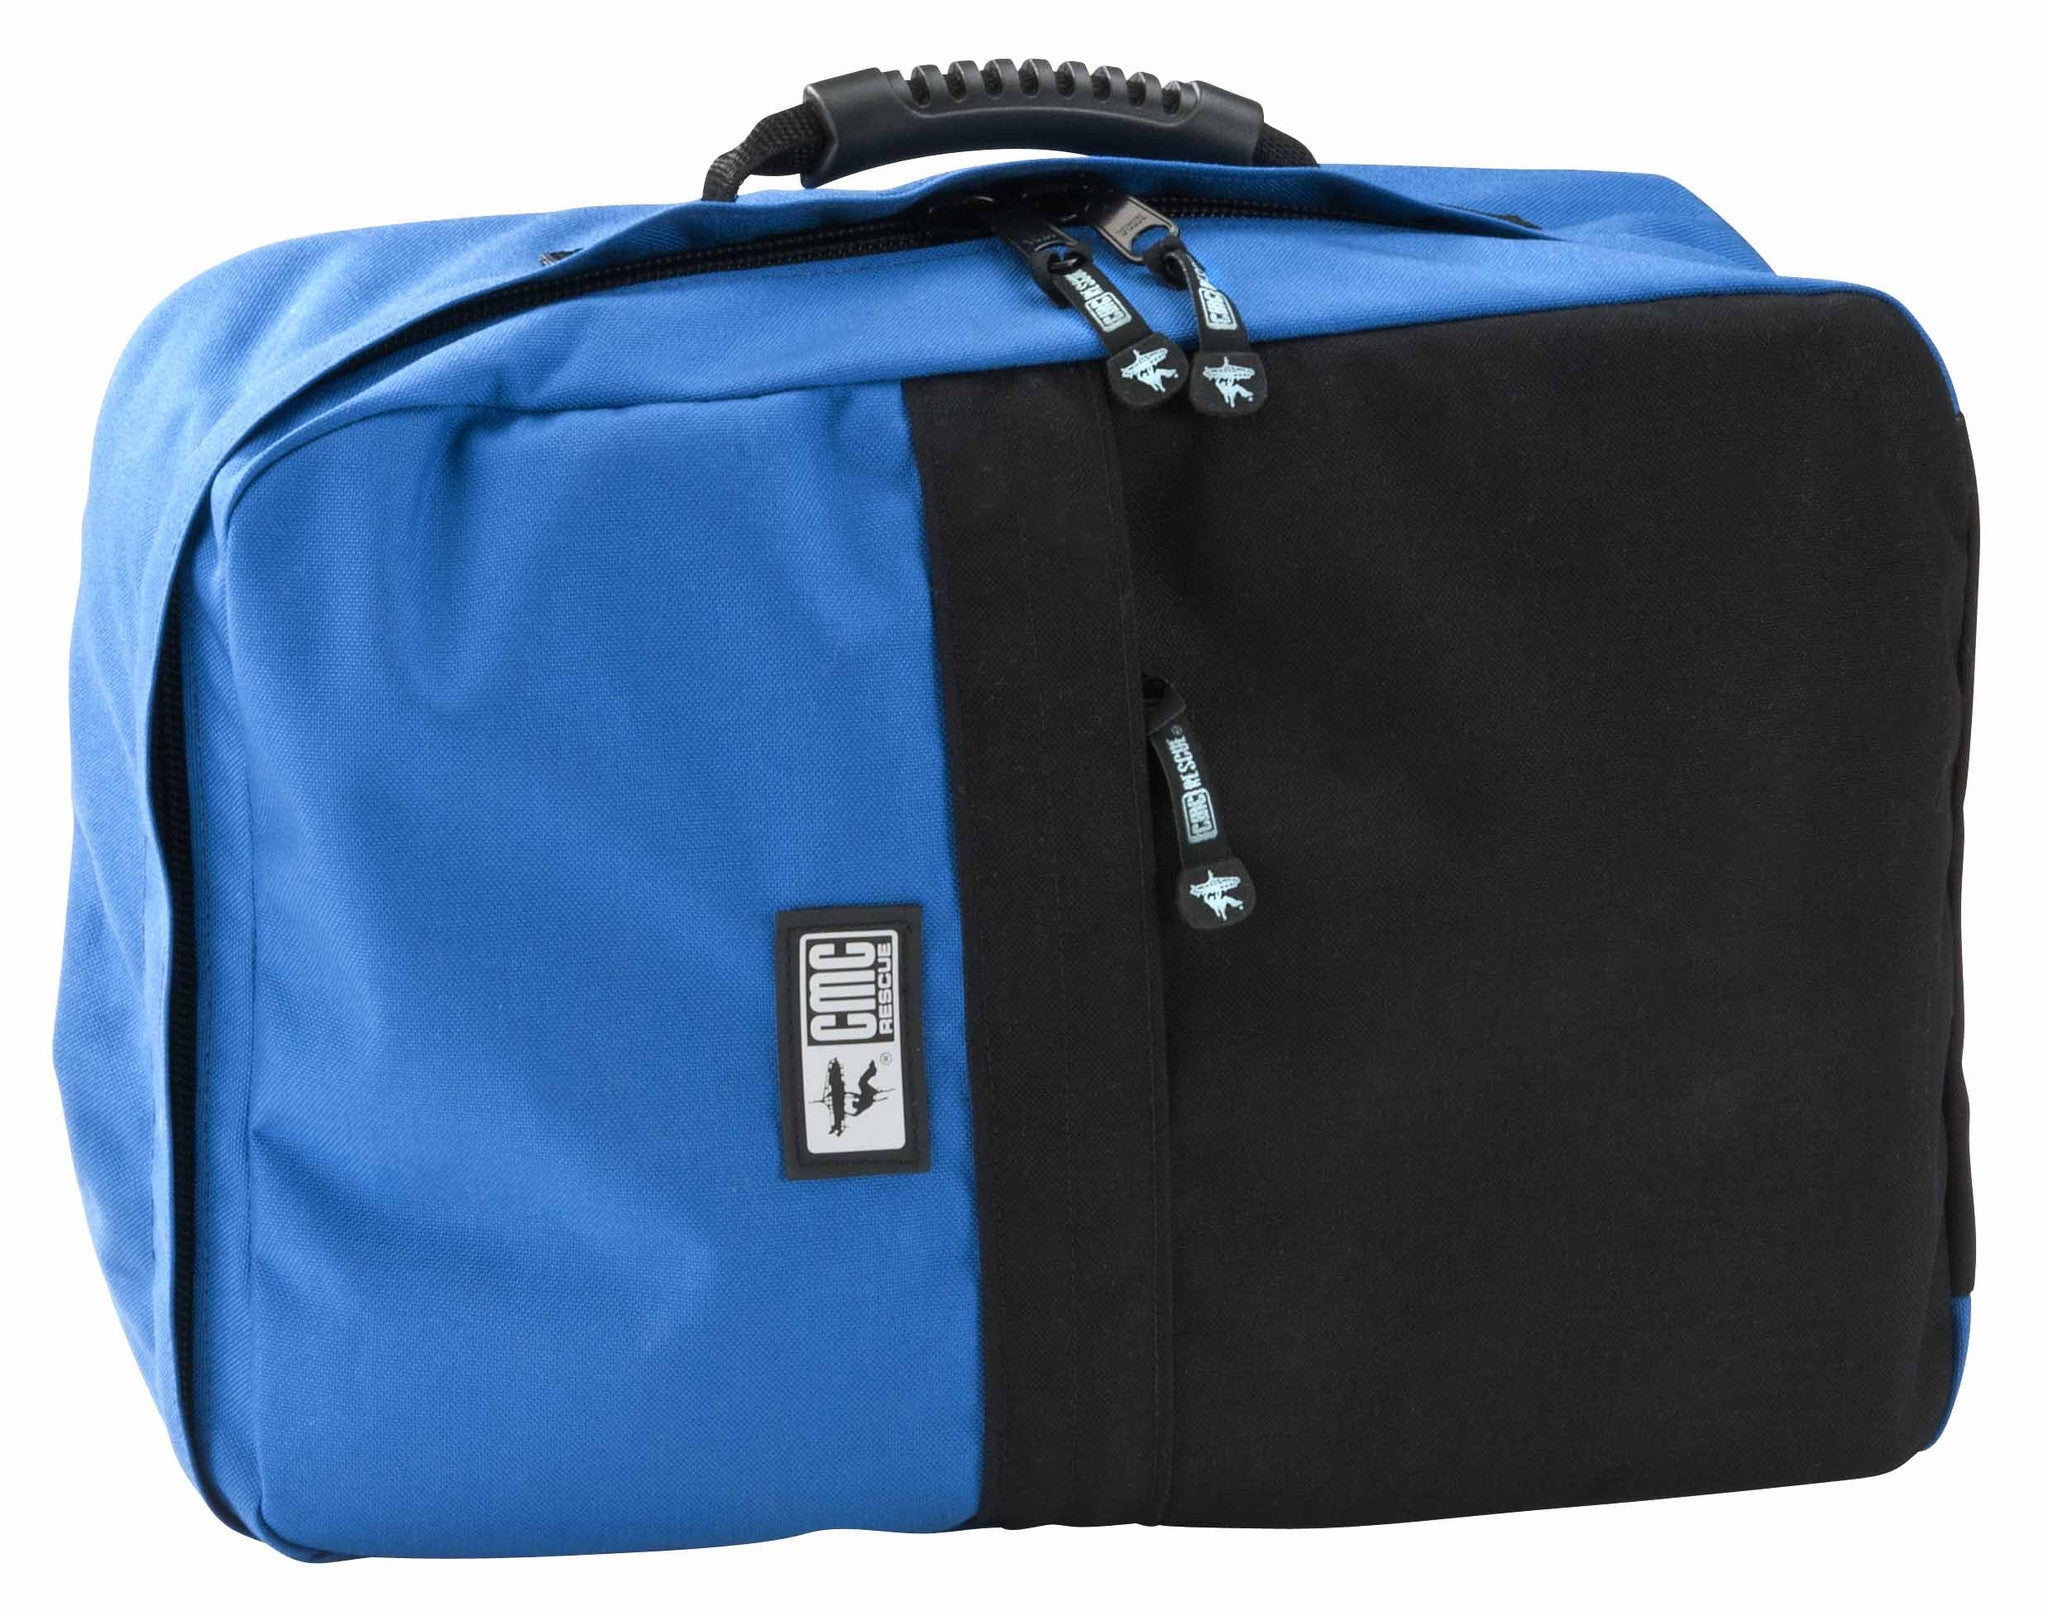 outdoor products Vortex 30 L Blue backpack, with fanny pack, and water  bottles | eBay